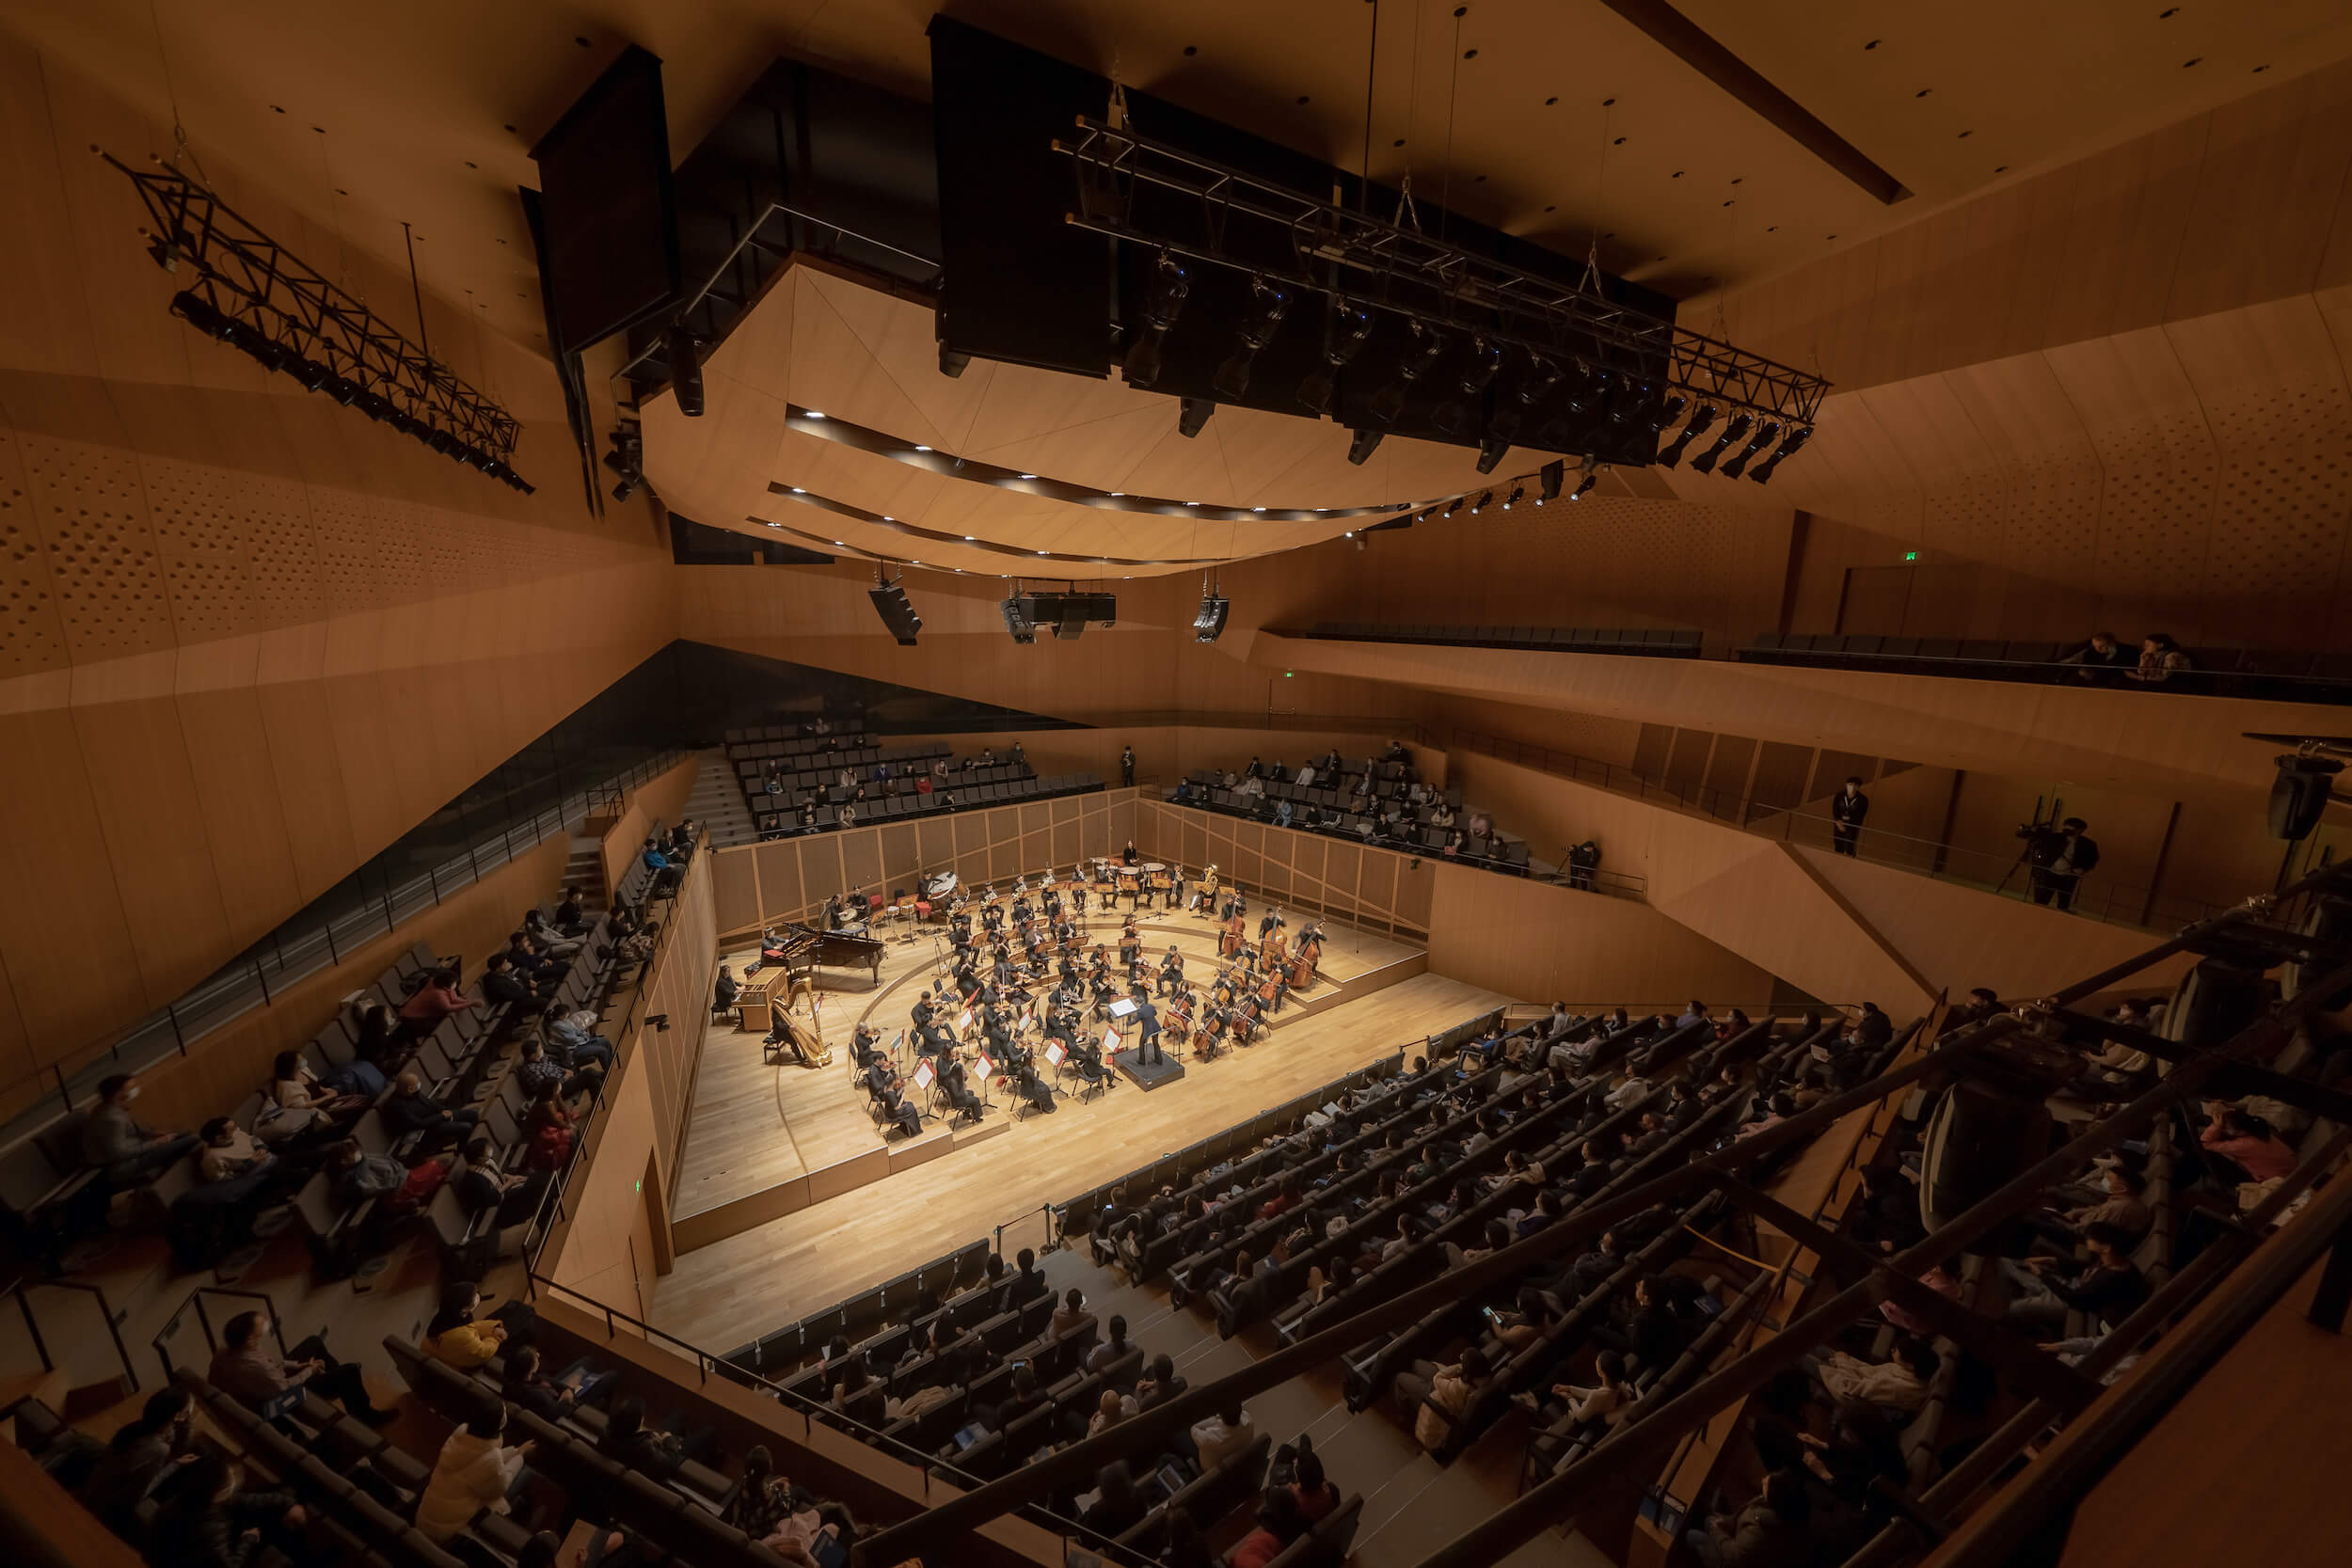 Inside a concert hall decked out in timber panels